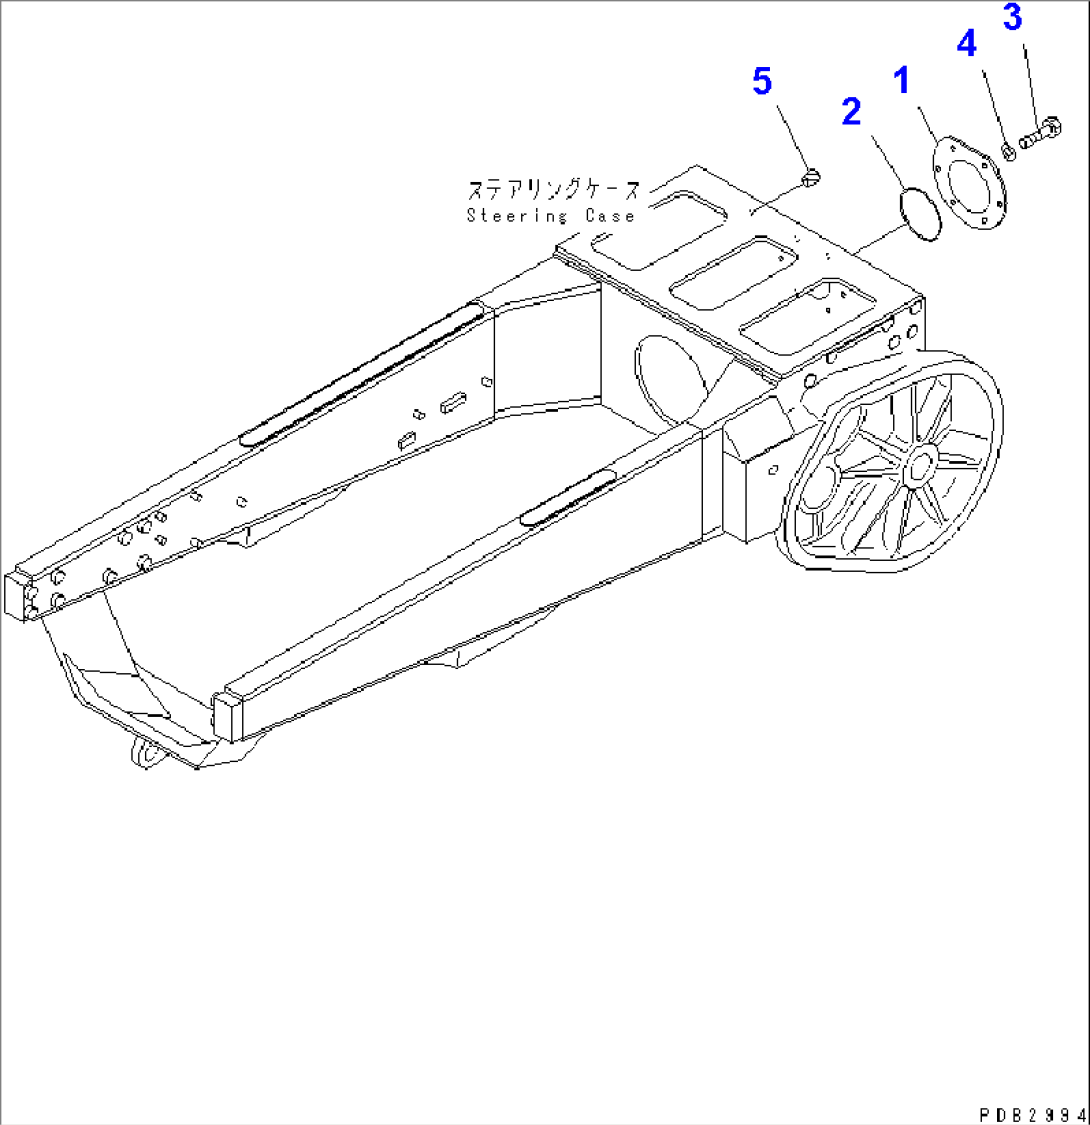 STEERING CASE REAR COVER